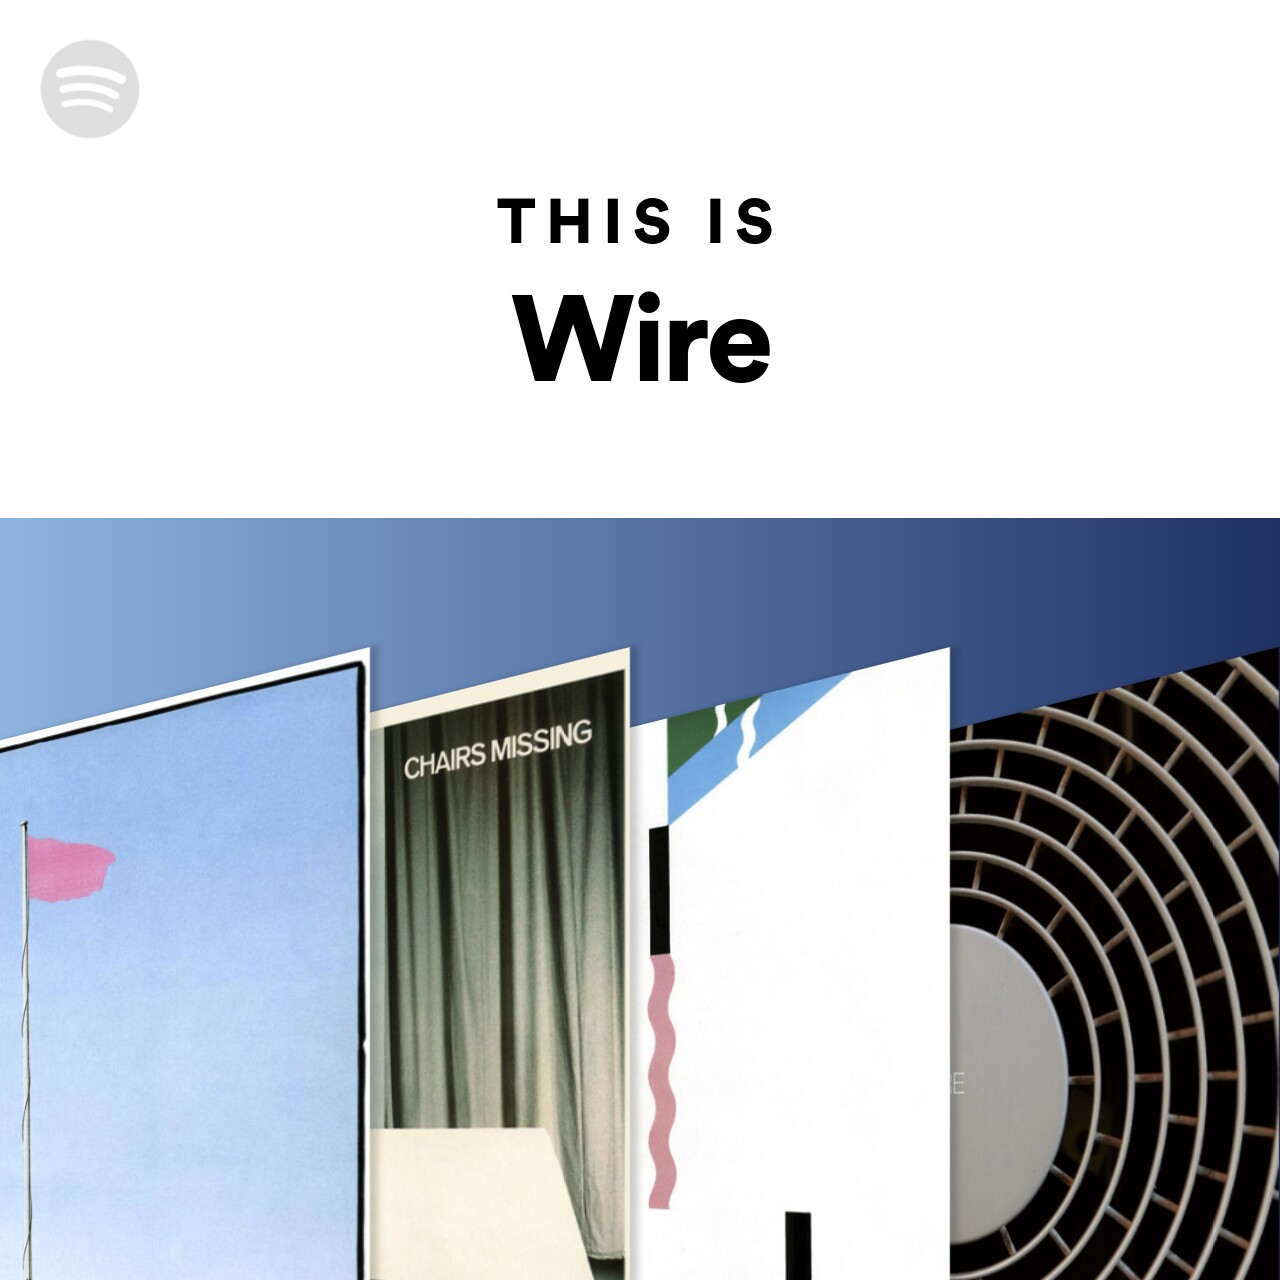 This Is Wire